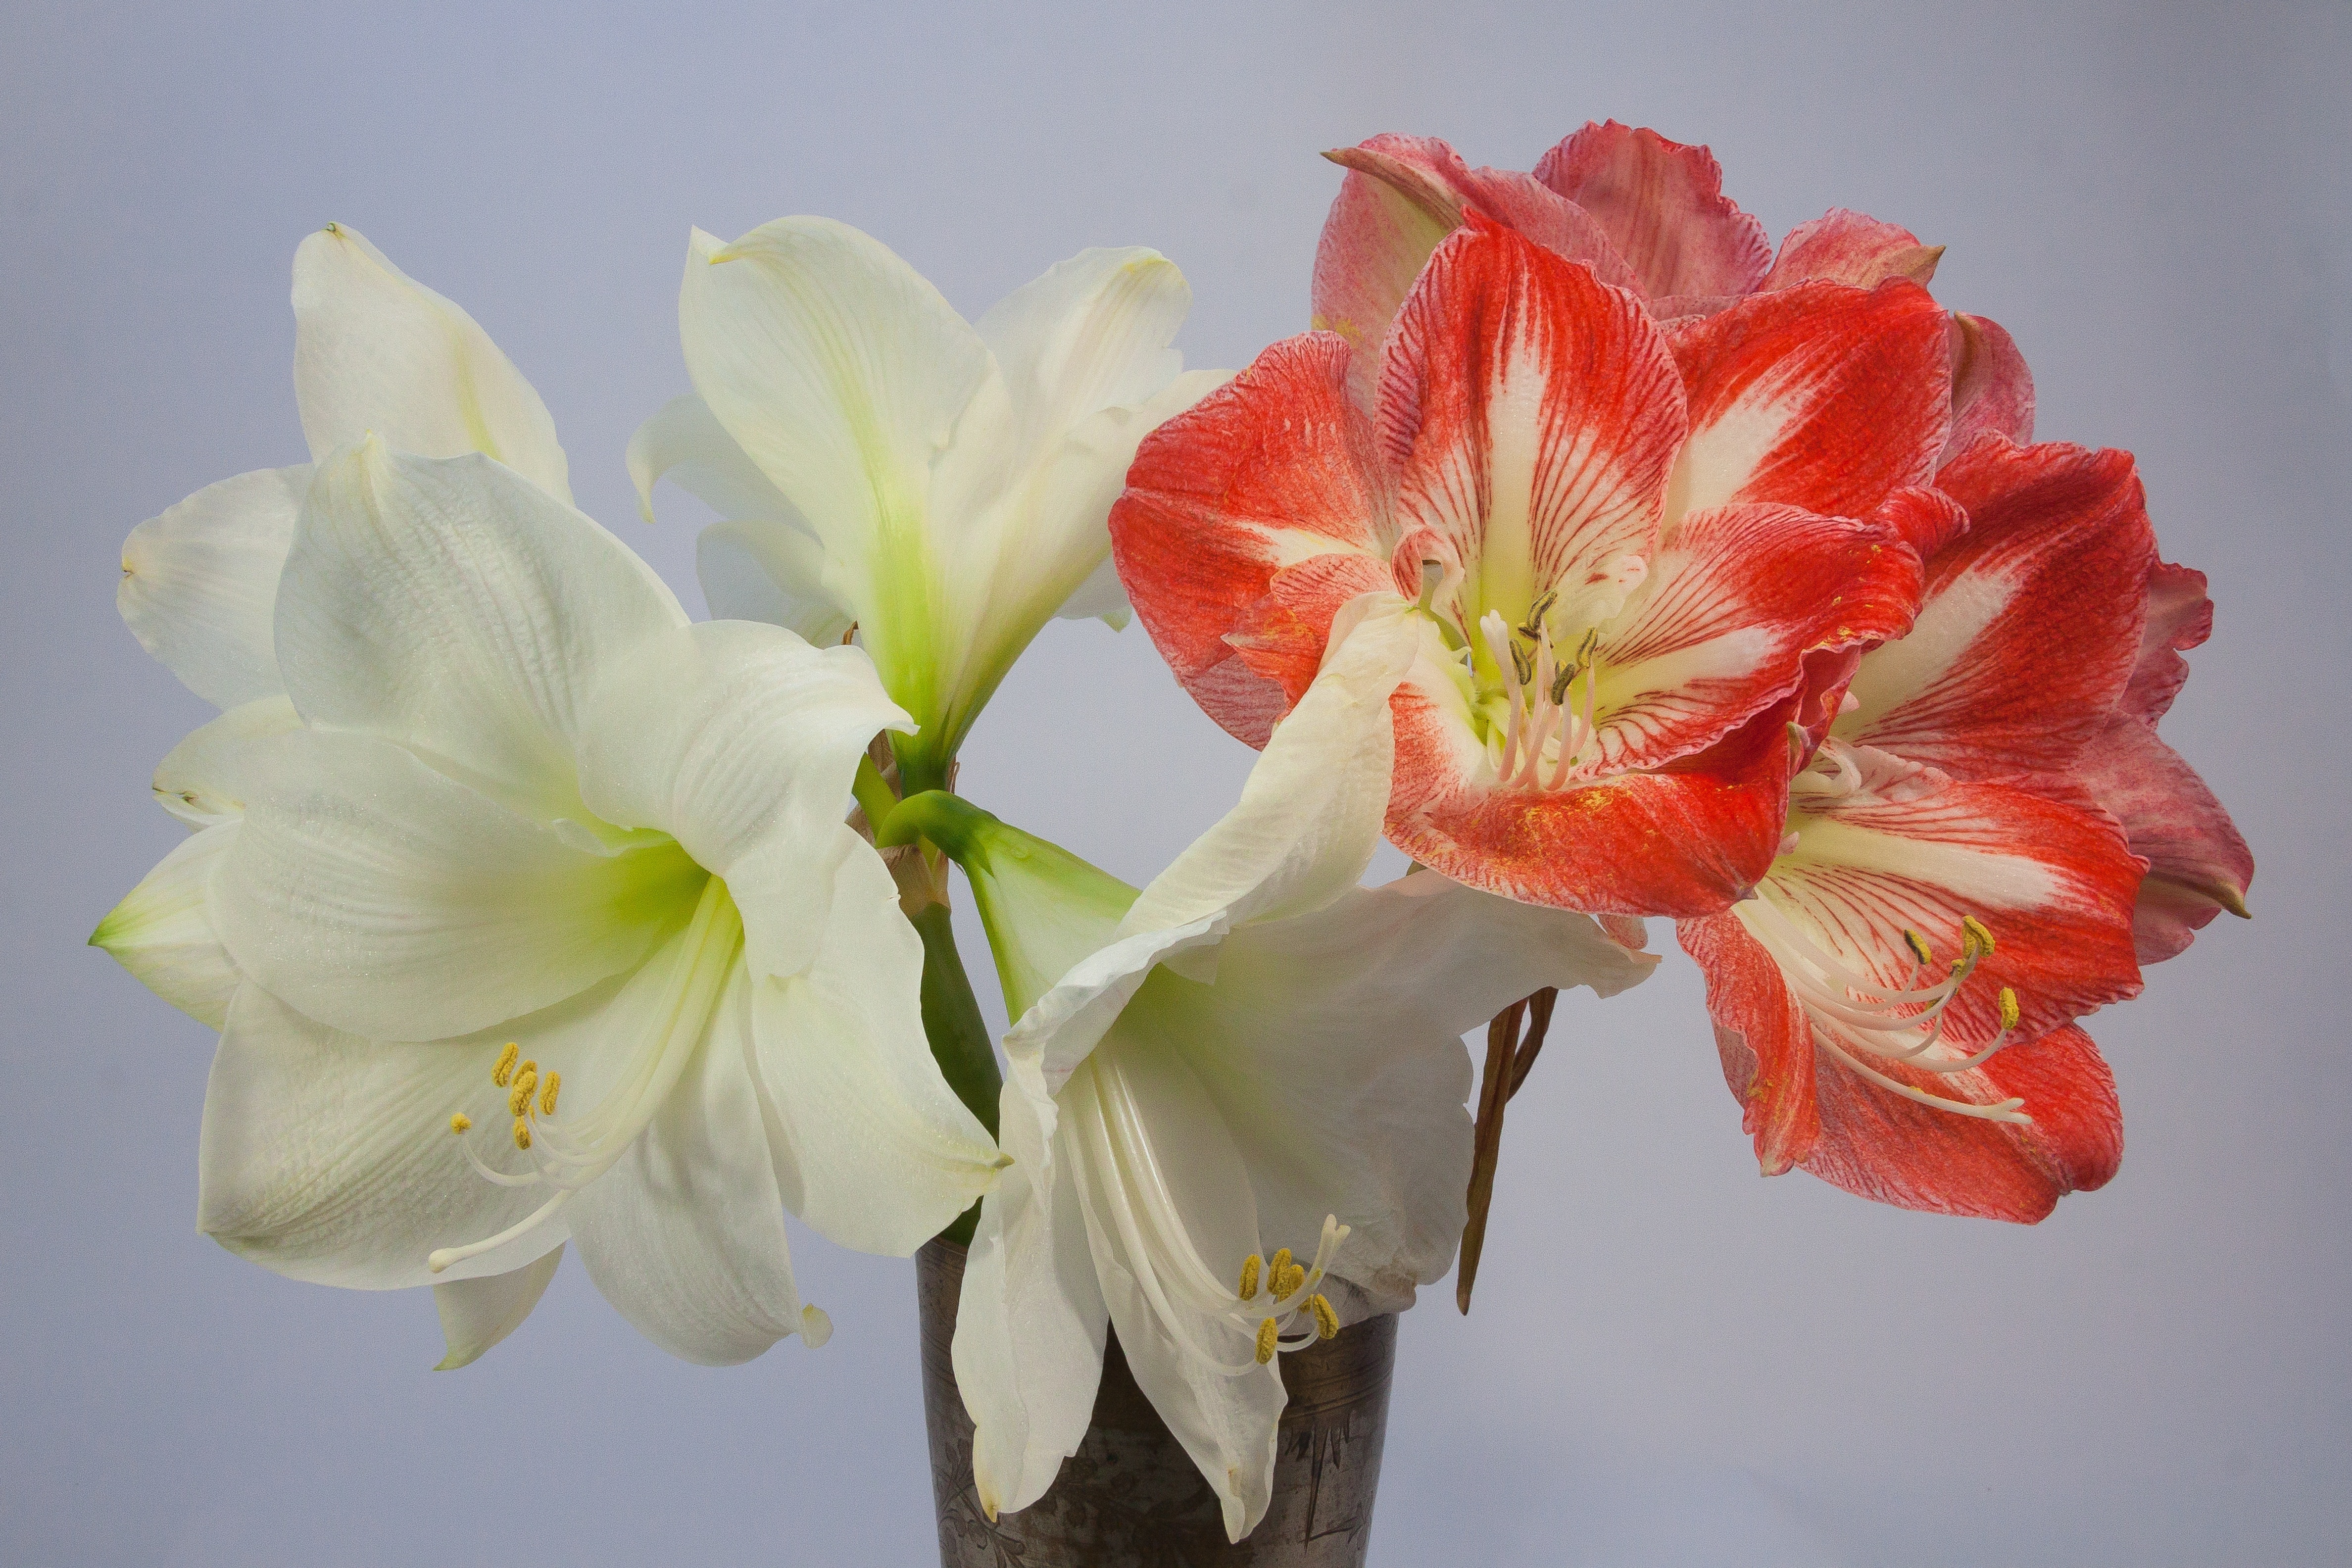 Red, Amaryllis, Blossom, White, Bloom, flower, no people